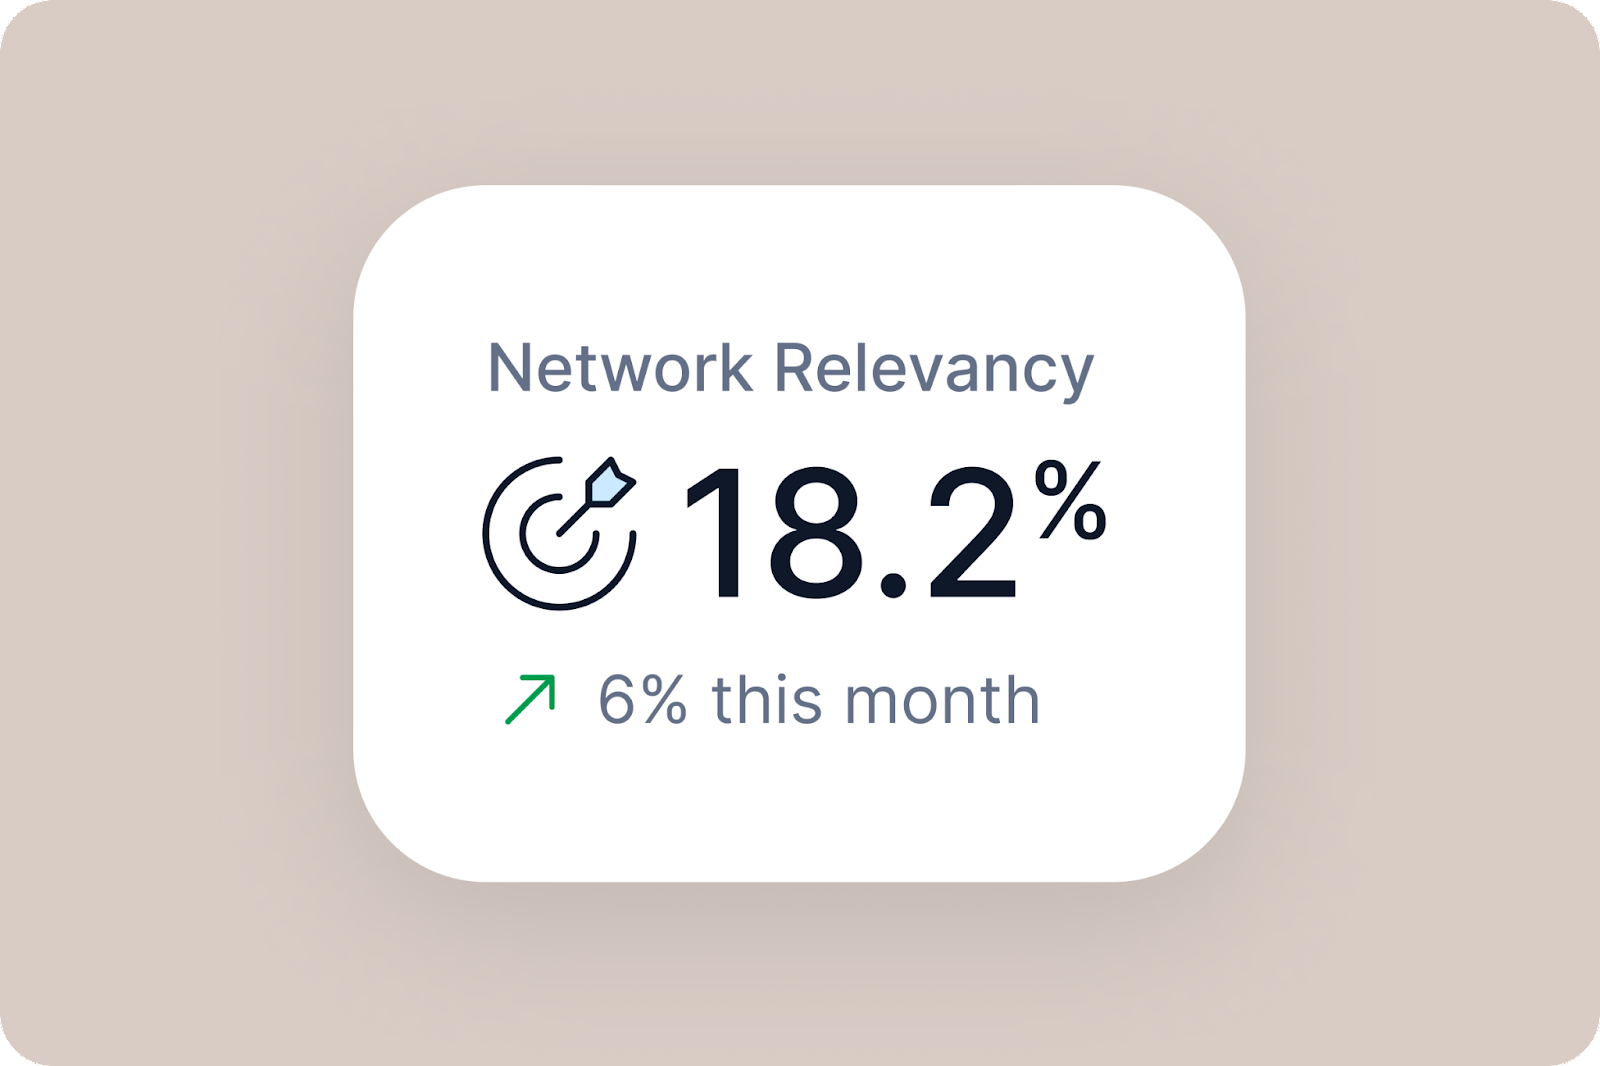 Queue's Network Relevancy metric displayed, indicating how well a user's LinkedIn connections align with their target demographic or customer profile.